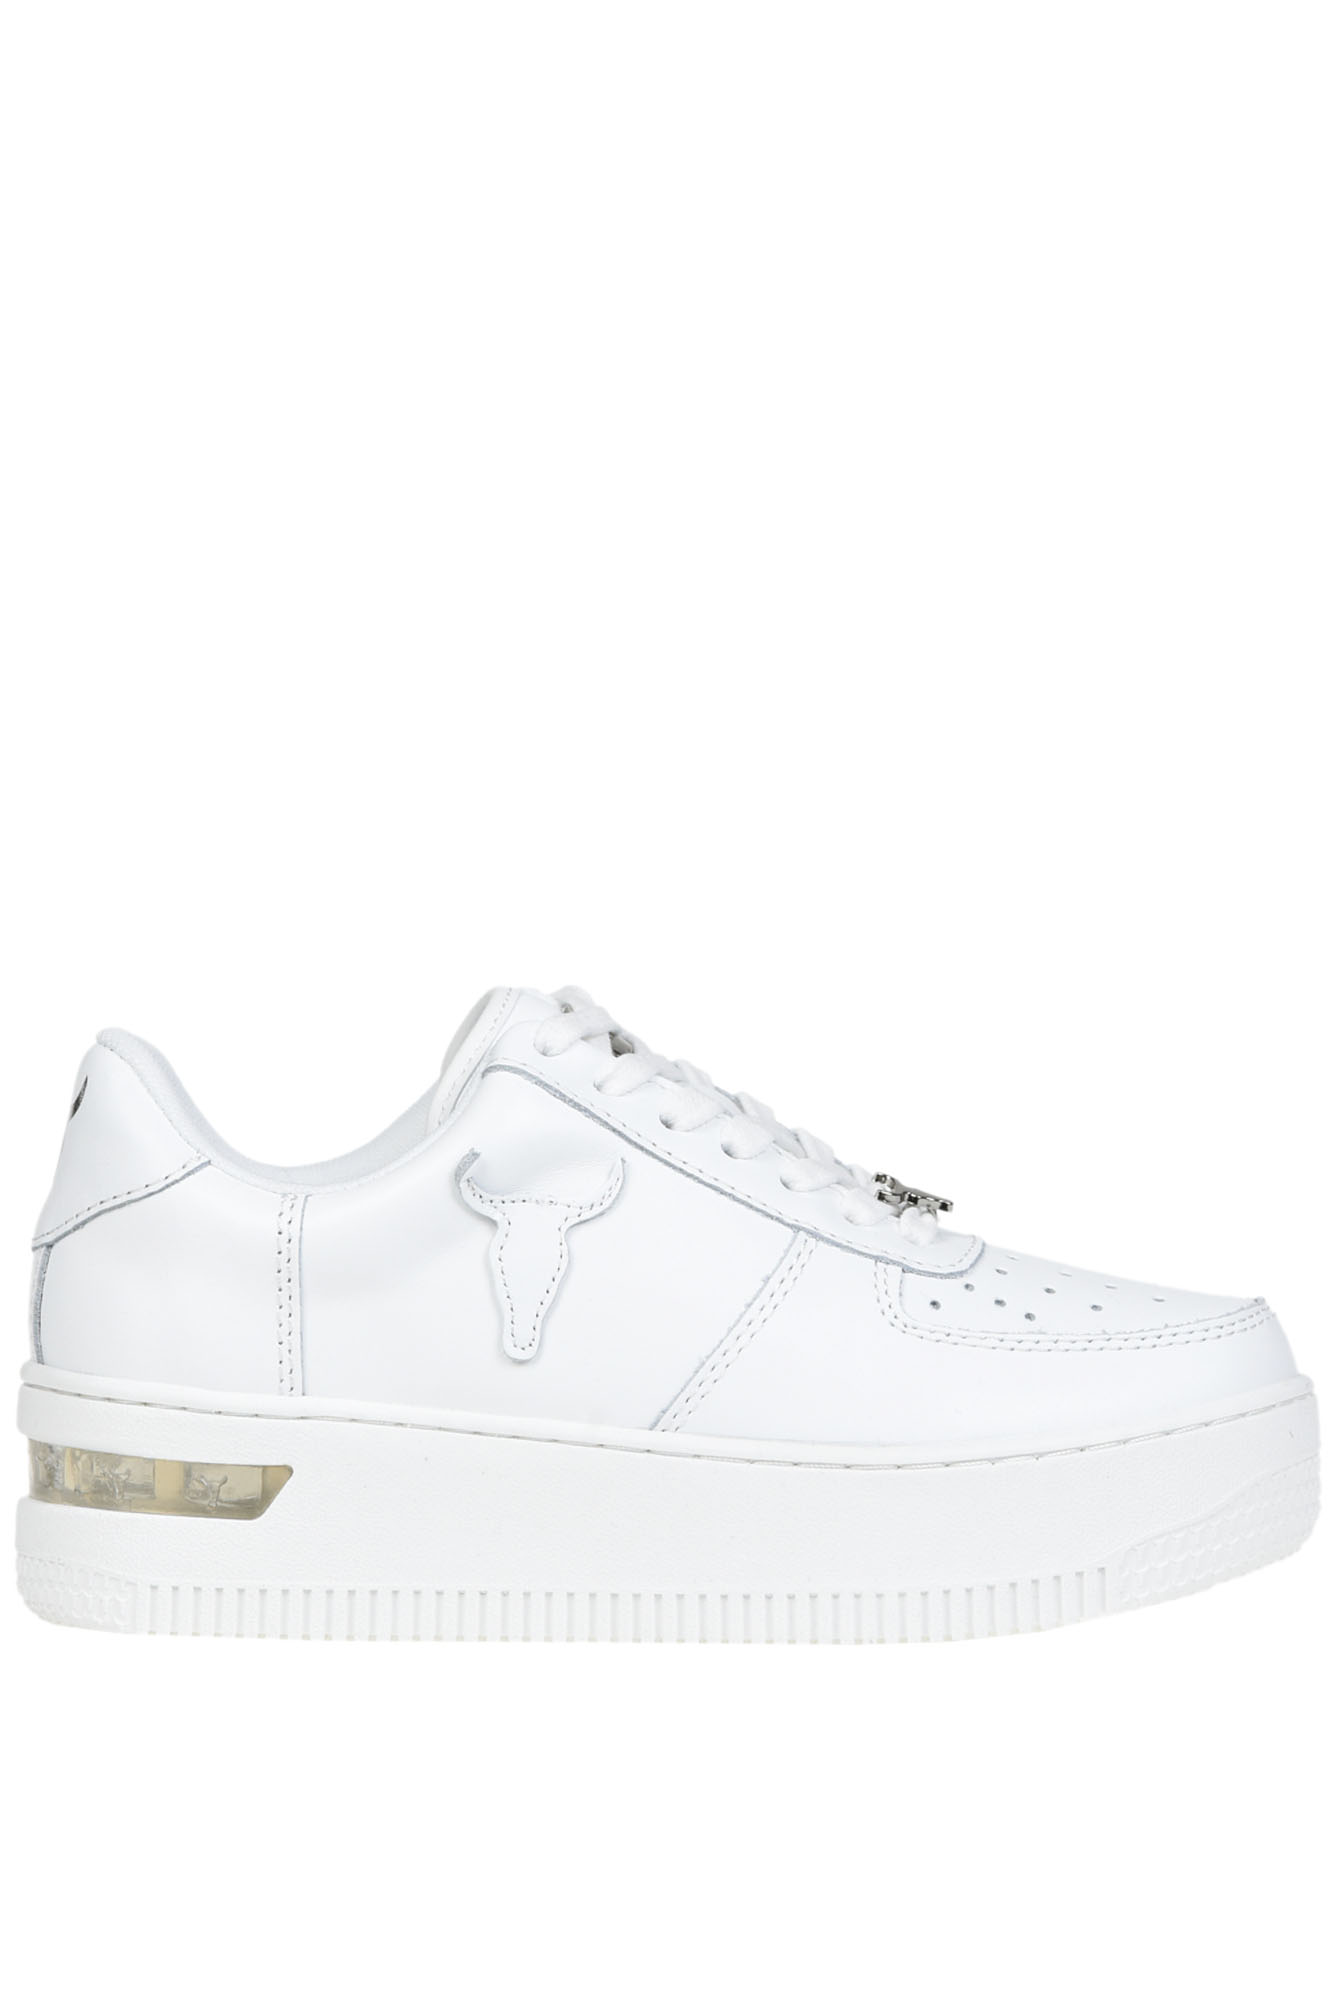 Windsor Smith Rhythm Trainers In White